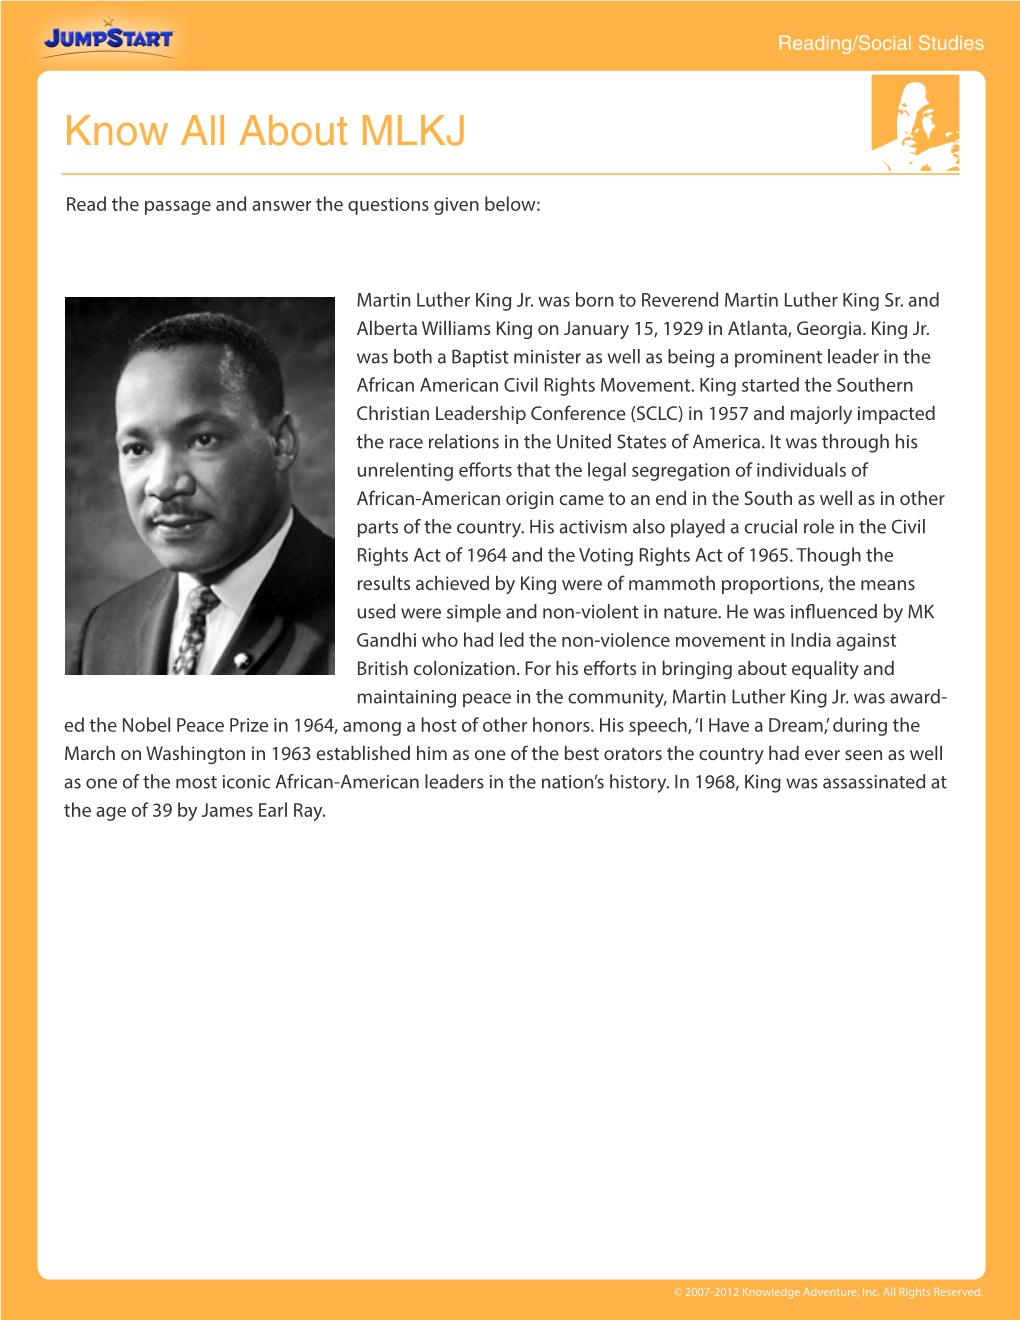 Know All About MLKJ